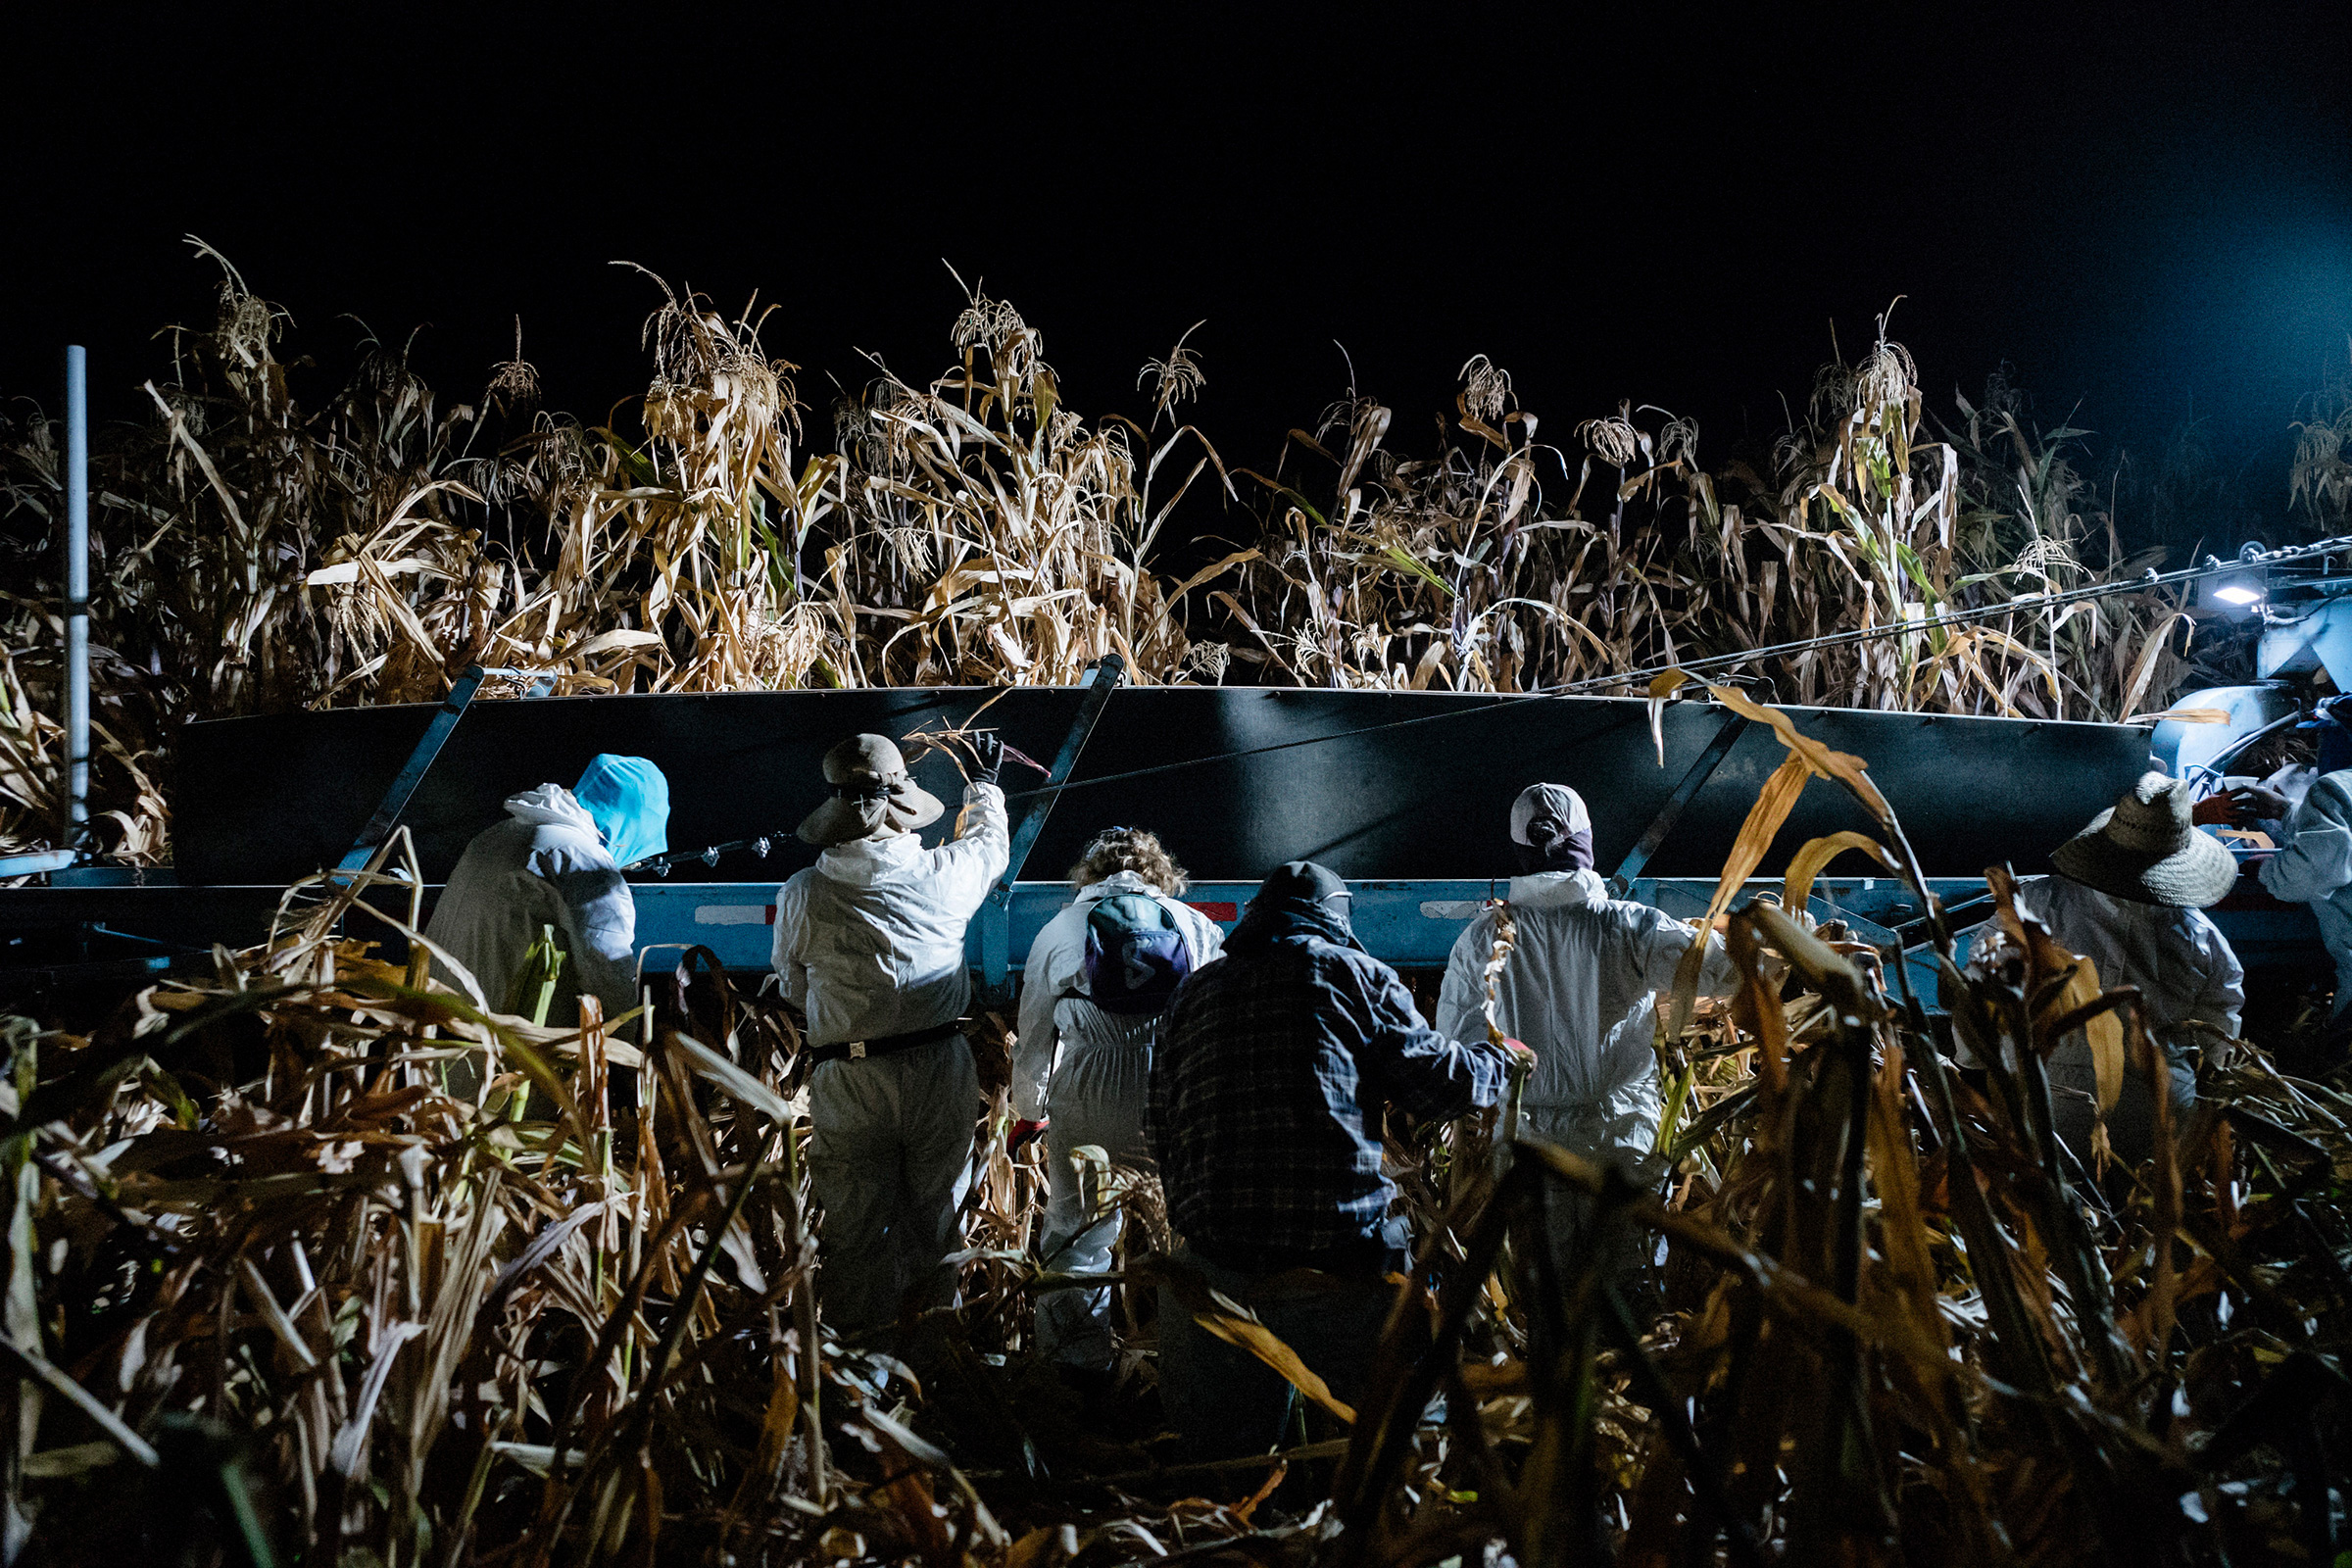 Workers pick corn in the pre-dawn hours to avoid the heat of the day in California's San Joaquin Valley on Aug. 21, 2020.